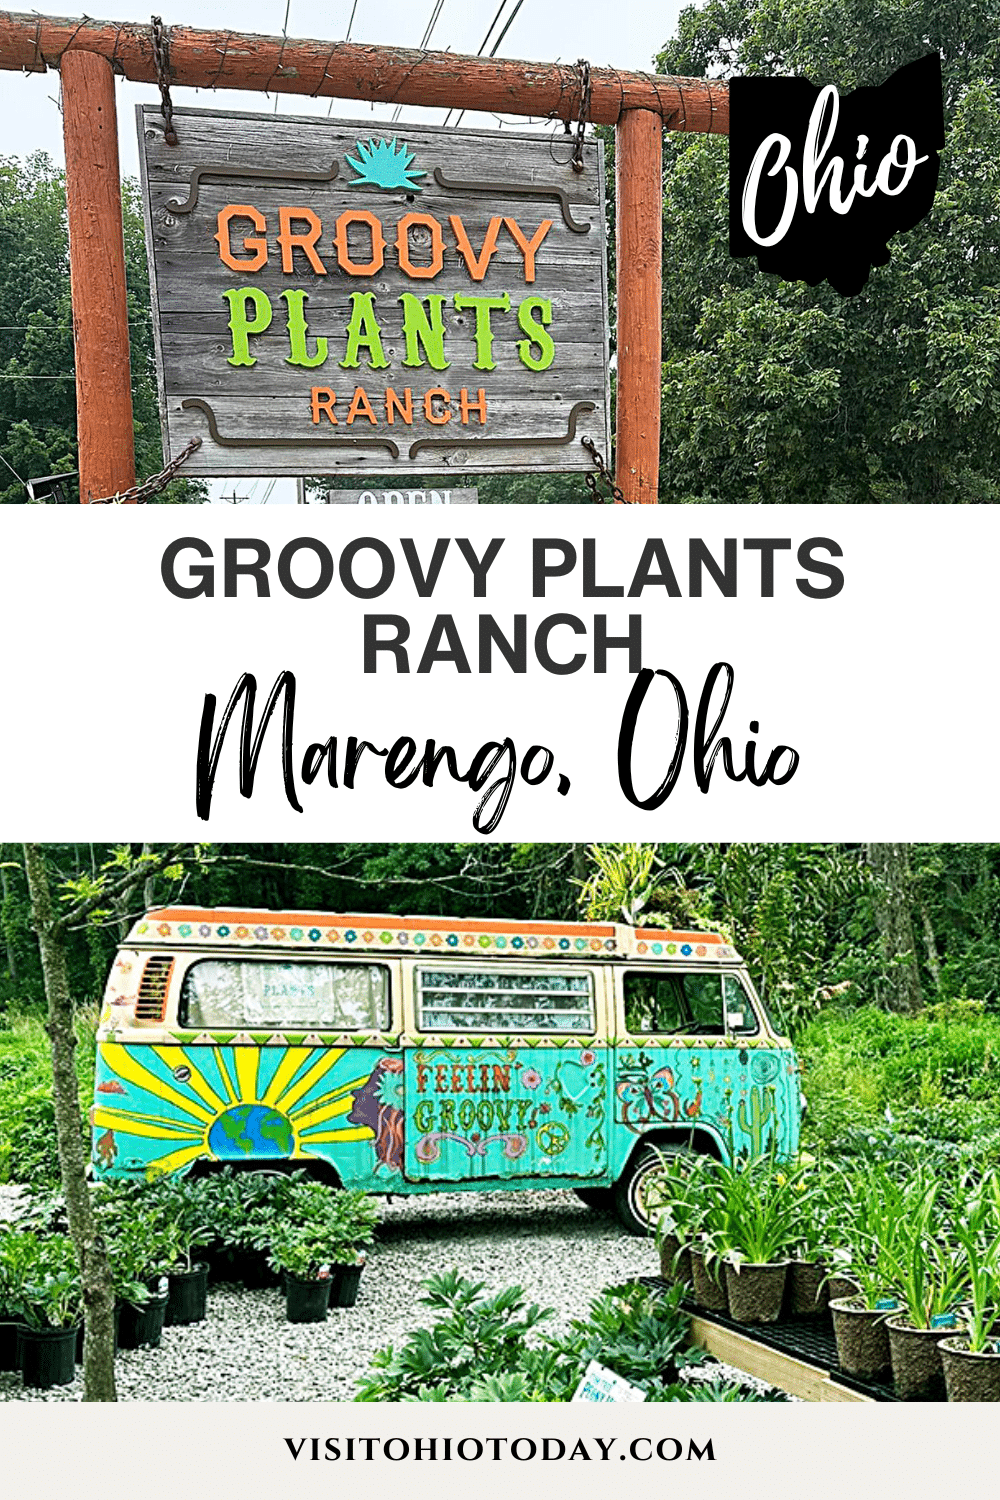 Groovy Plants Ranch is a family-owned greenhouse in Marengo, central Ohio. Just 18 miles from Delaware, and 36 miles from Columbus – a visit to Groovy Plants is worth the drive!